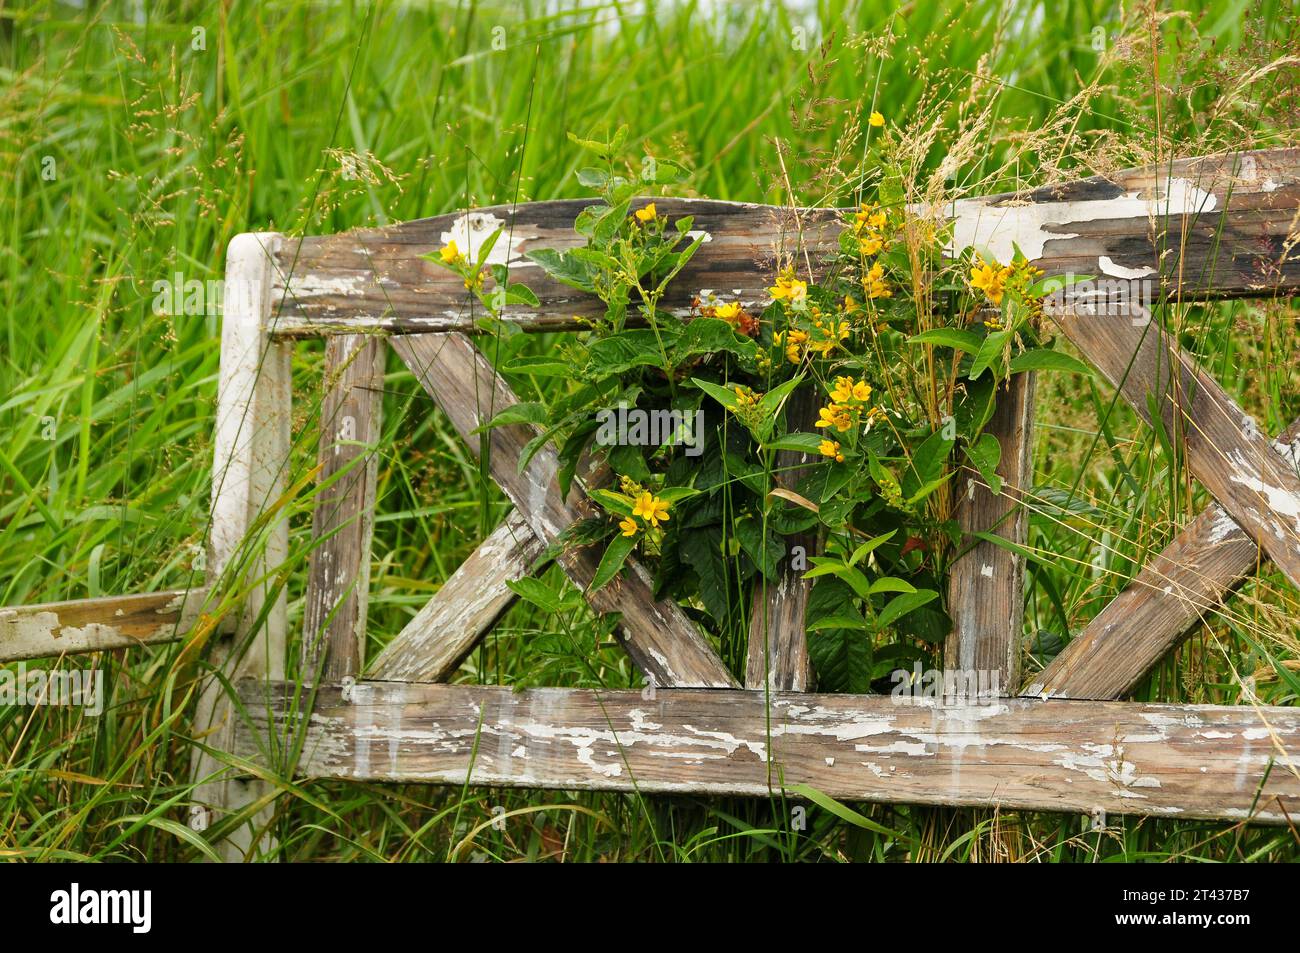 Sections of an aged wooden bench adorned with lush grass and vibrant yellow blooms. Stock Photo